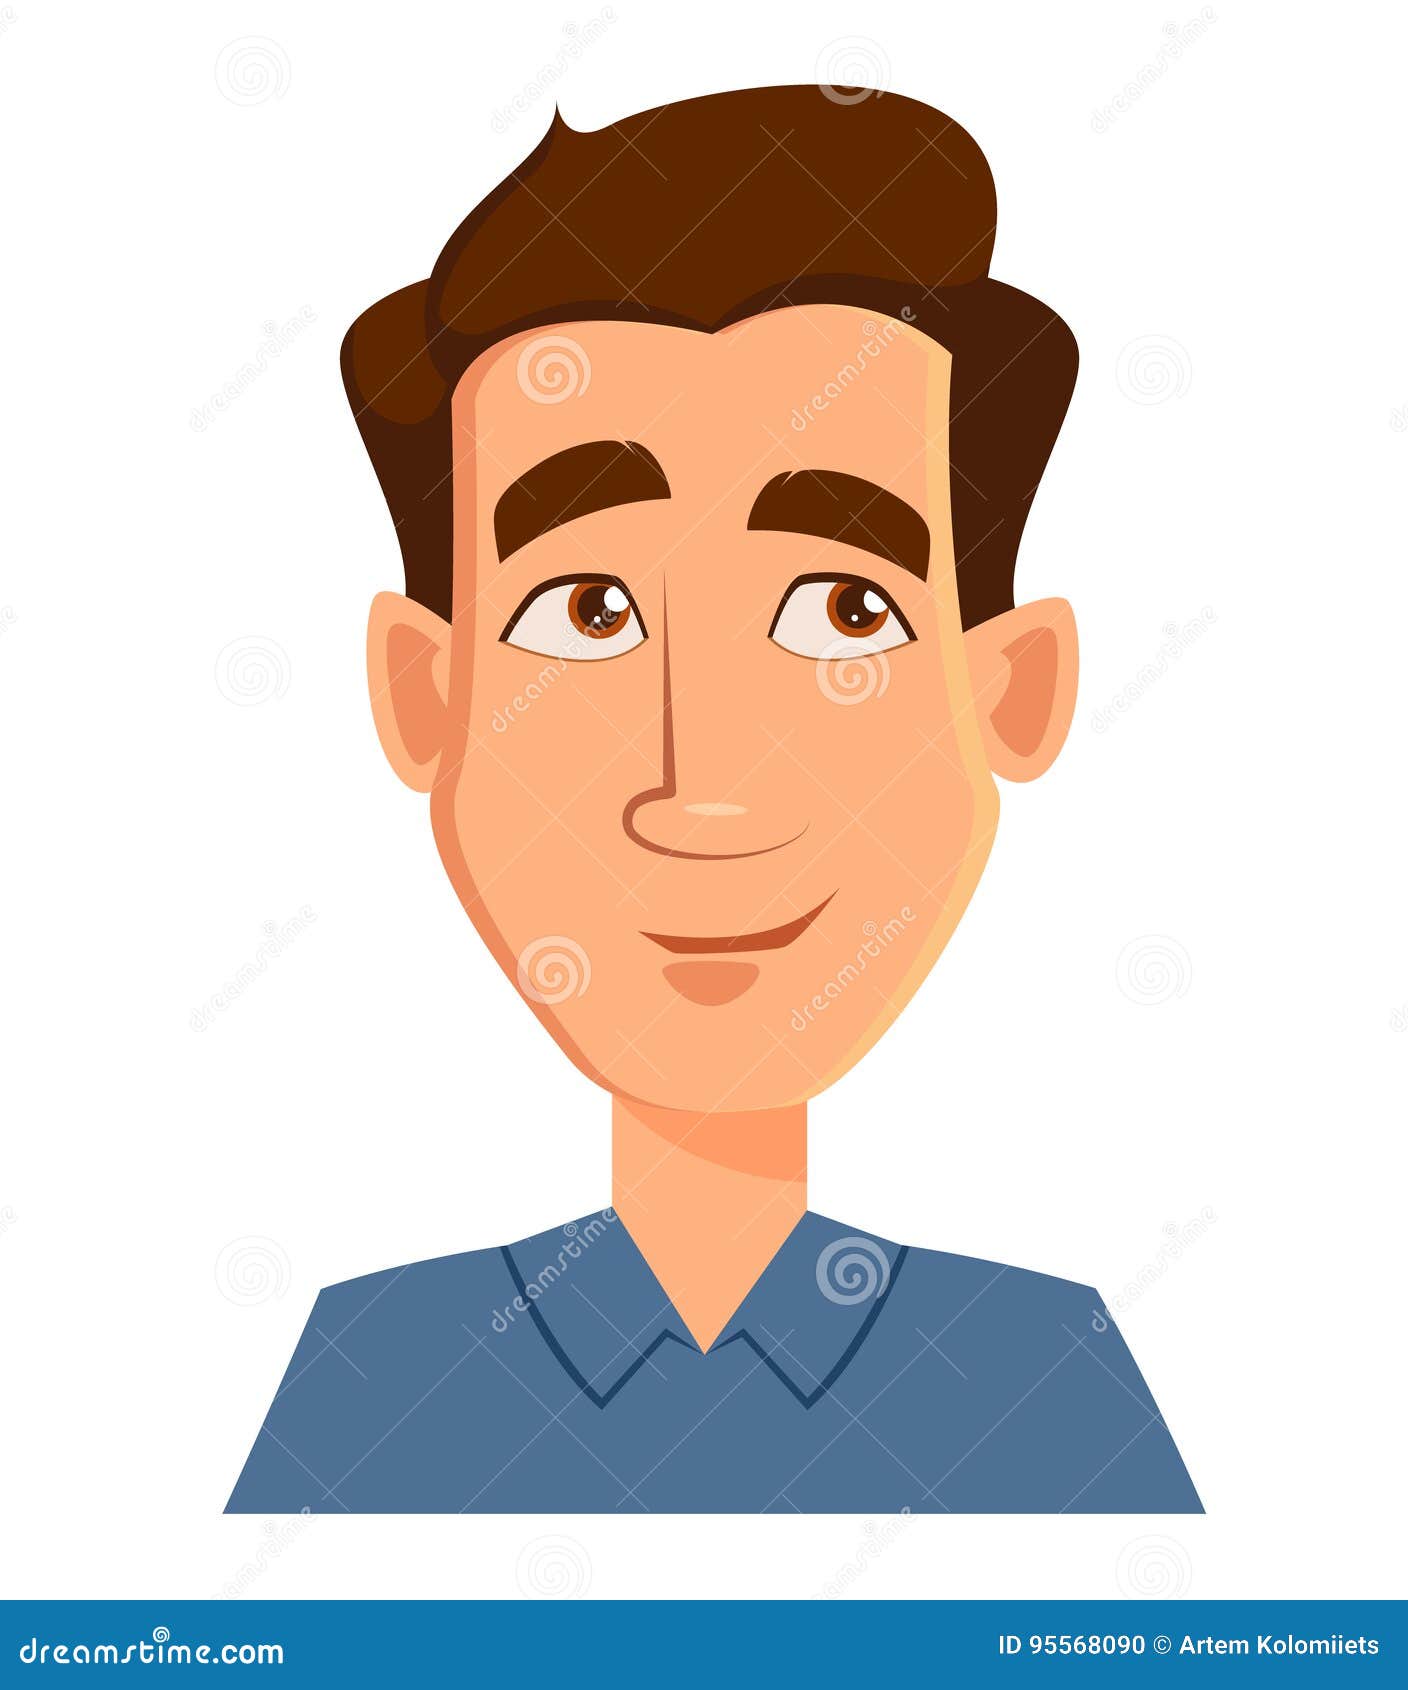 Face Expression of a Man - Thinking. Male Emotions. Handsome Cartoon  Character Stock Vector - Illustration of charming, human: 95568090